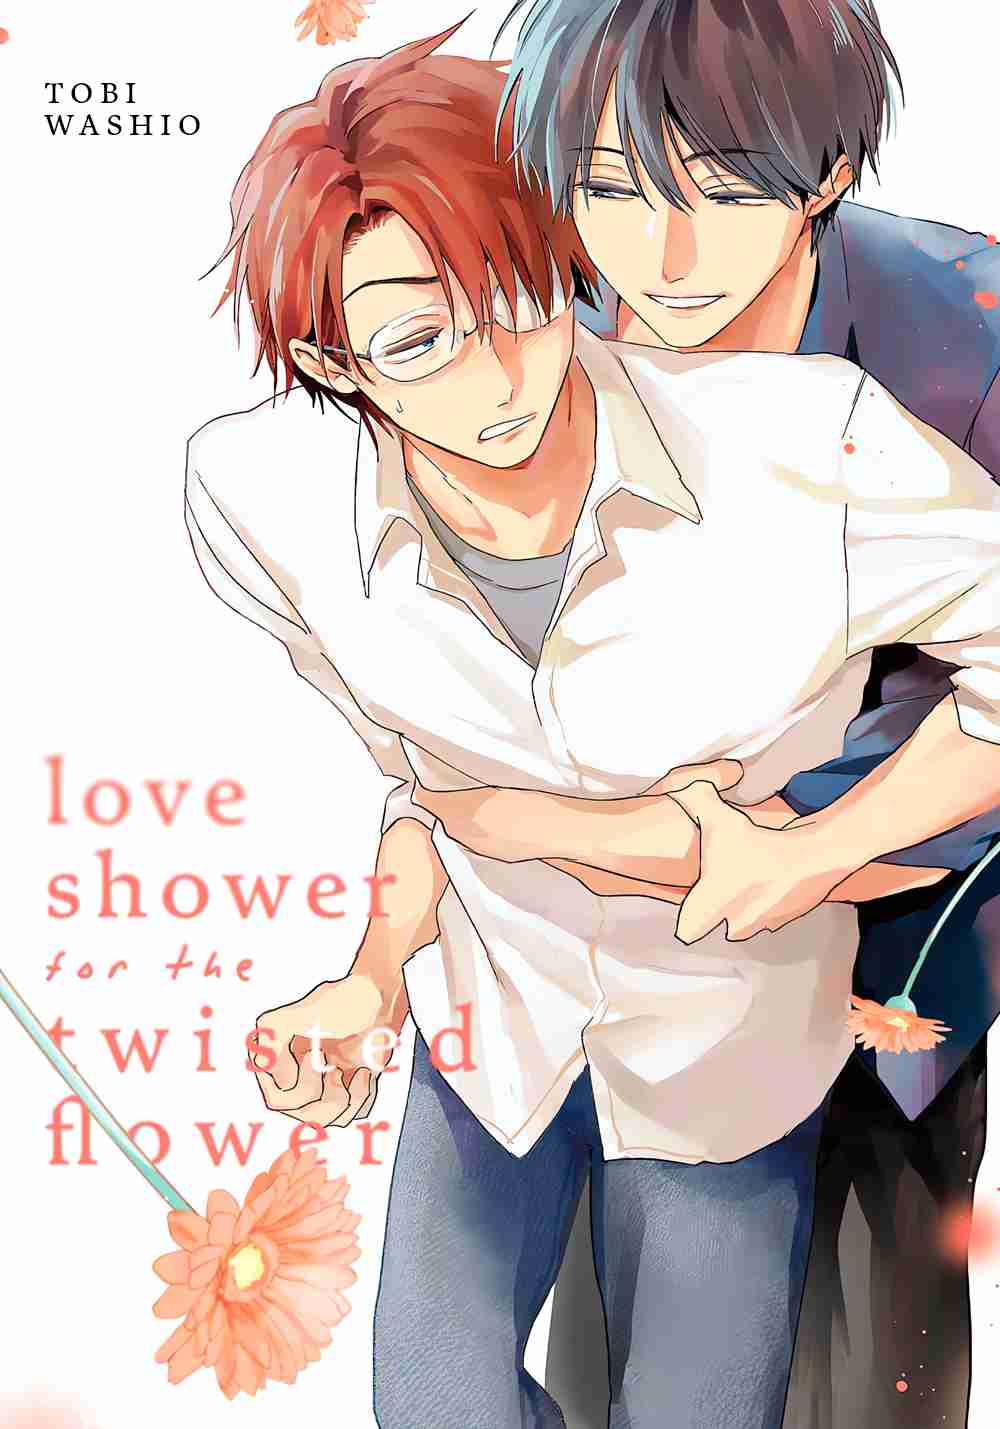 Love-Shower for the Twisted Flower 1